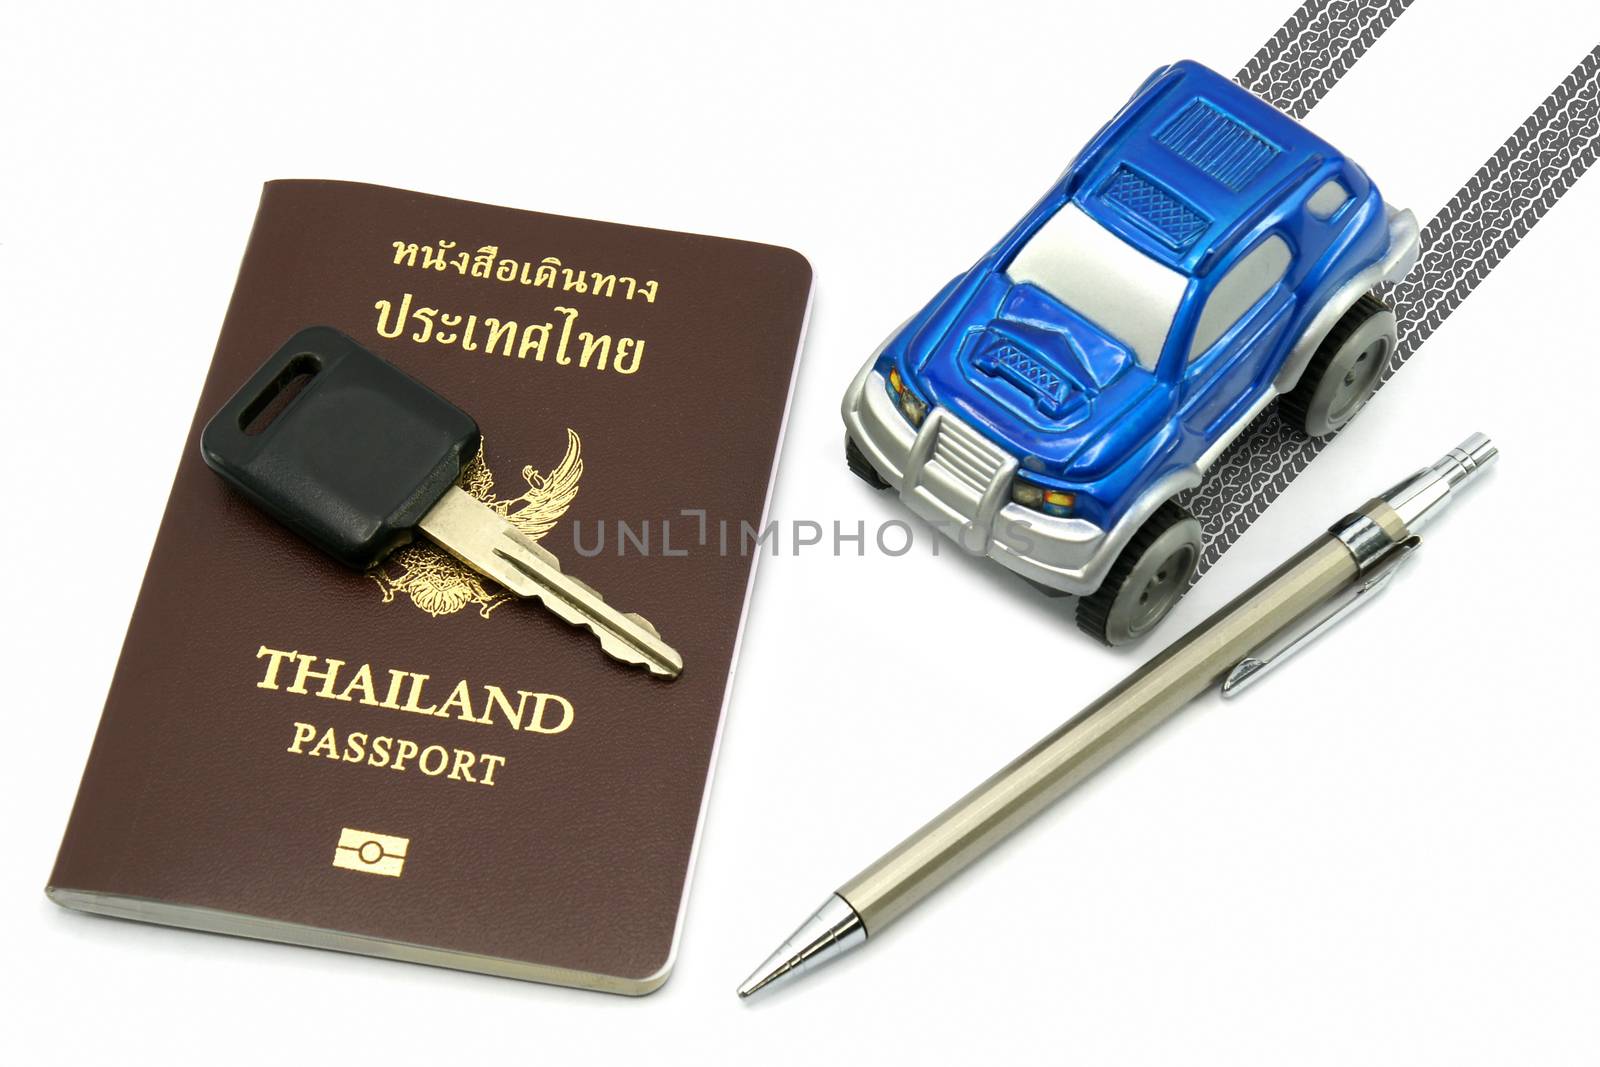 Thailand passport, key, pen and blue 4wd car for travel concept by mranucha